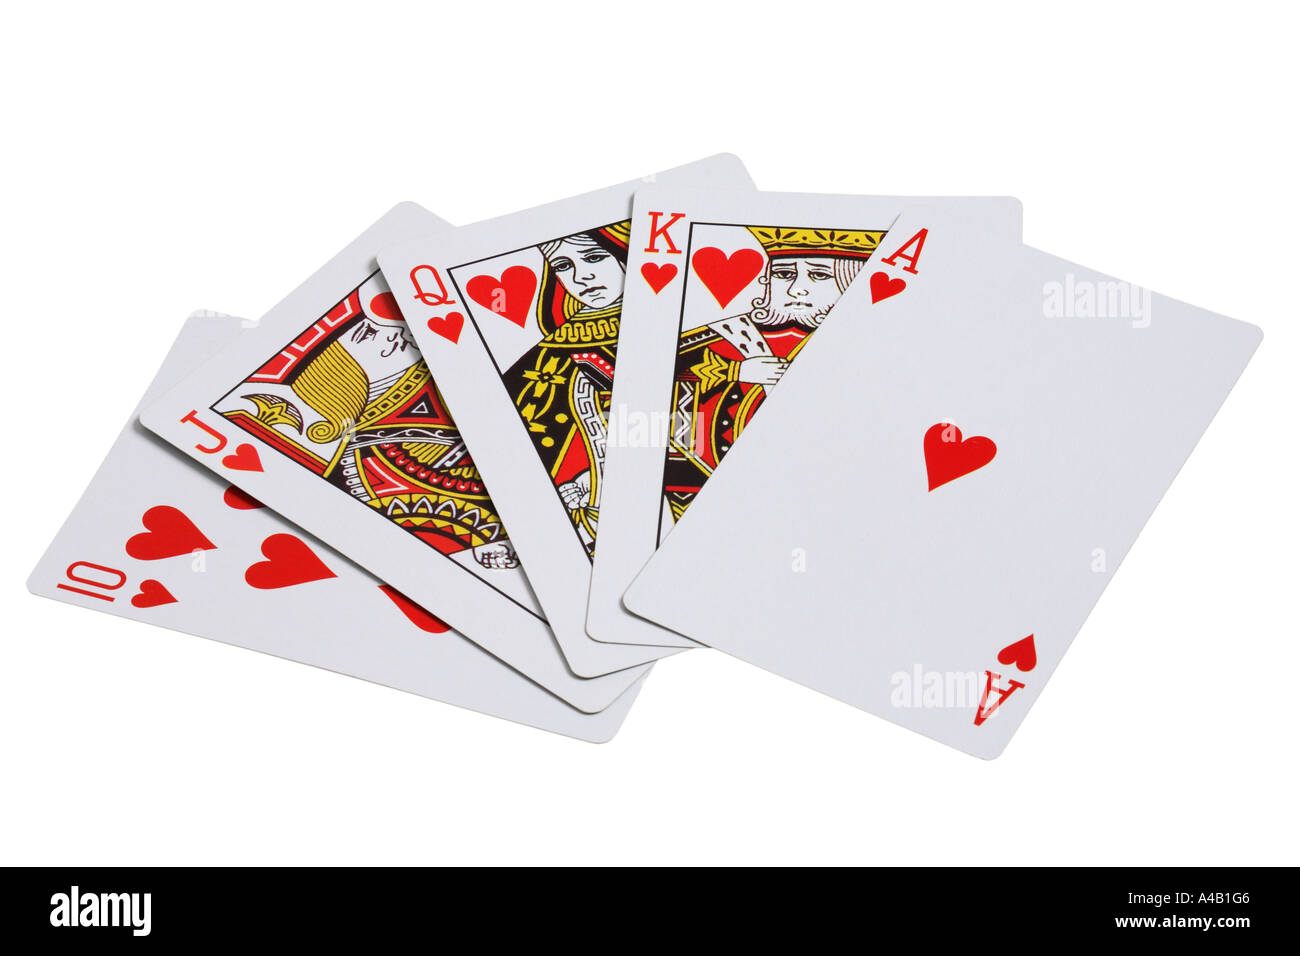 10 Jack Queen King and Ace of Hearts Cards Stock Photo: 6281157 - Alamy